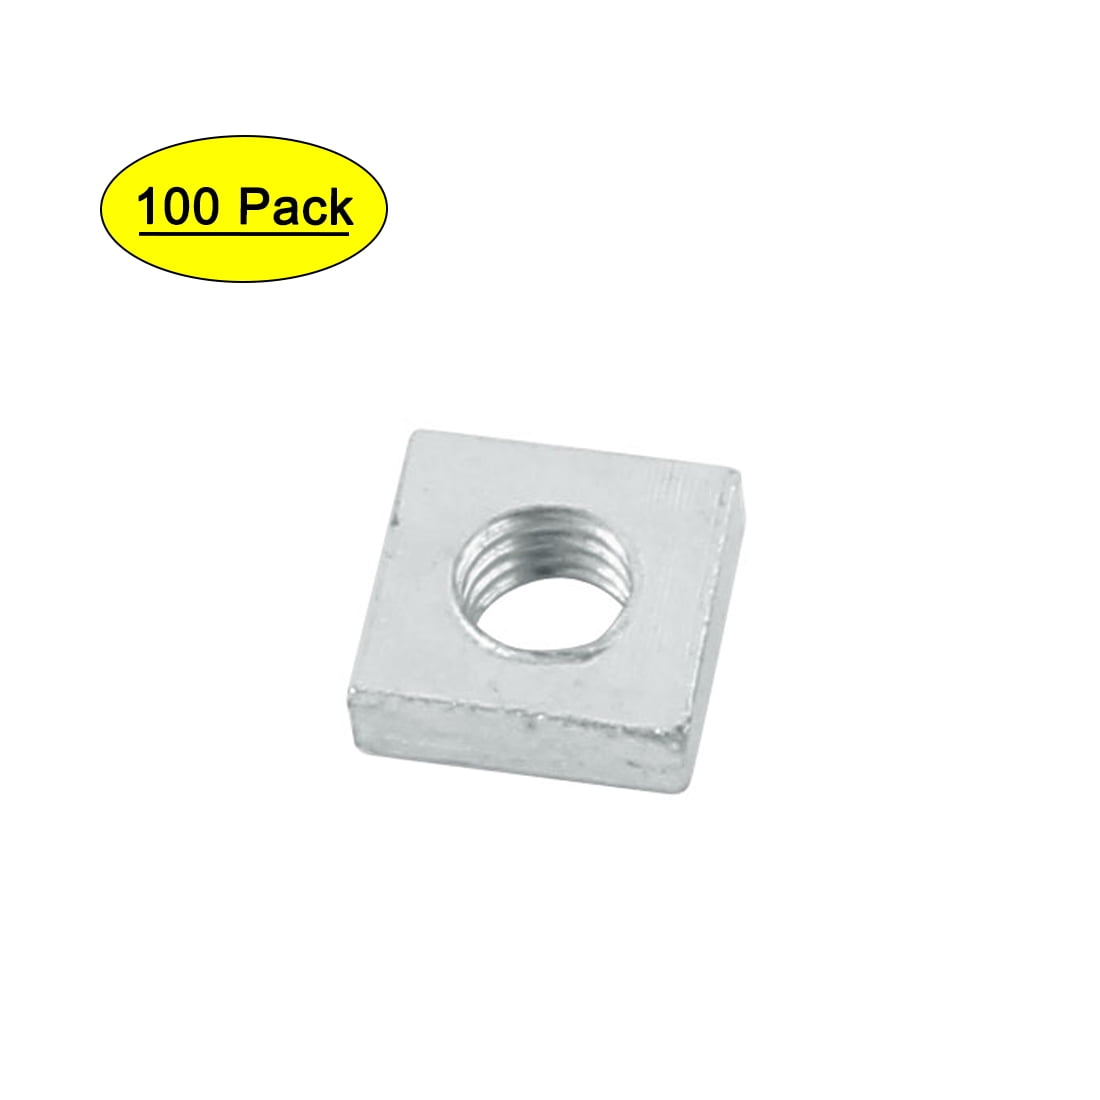 100pcs M3 Metric Square Nuts 18-8 Stainless Steel Fastener 100 304 